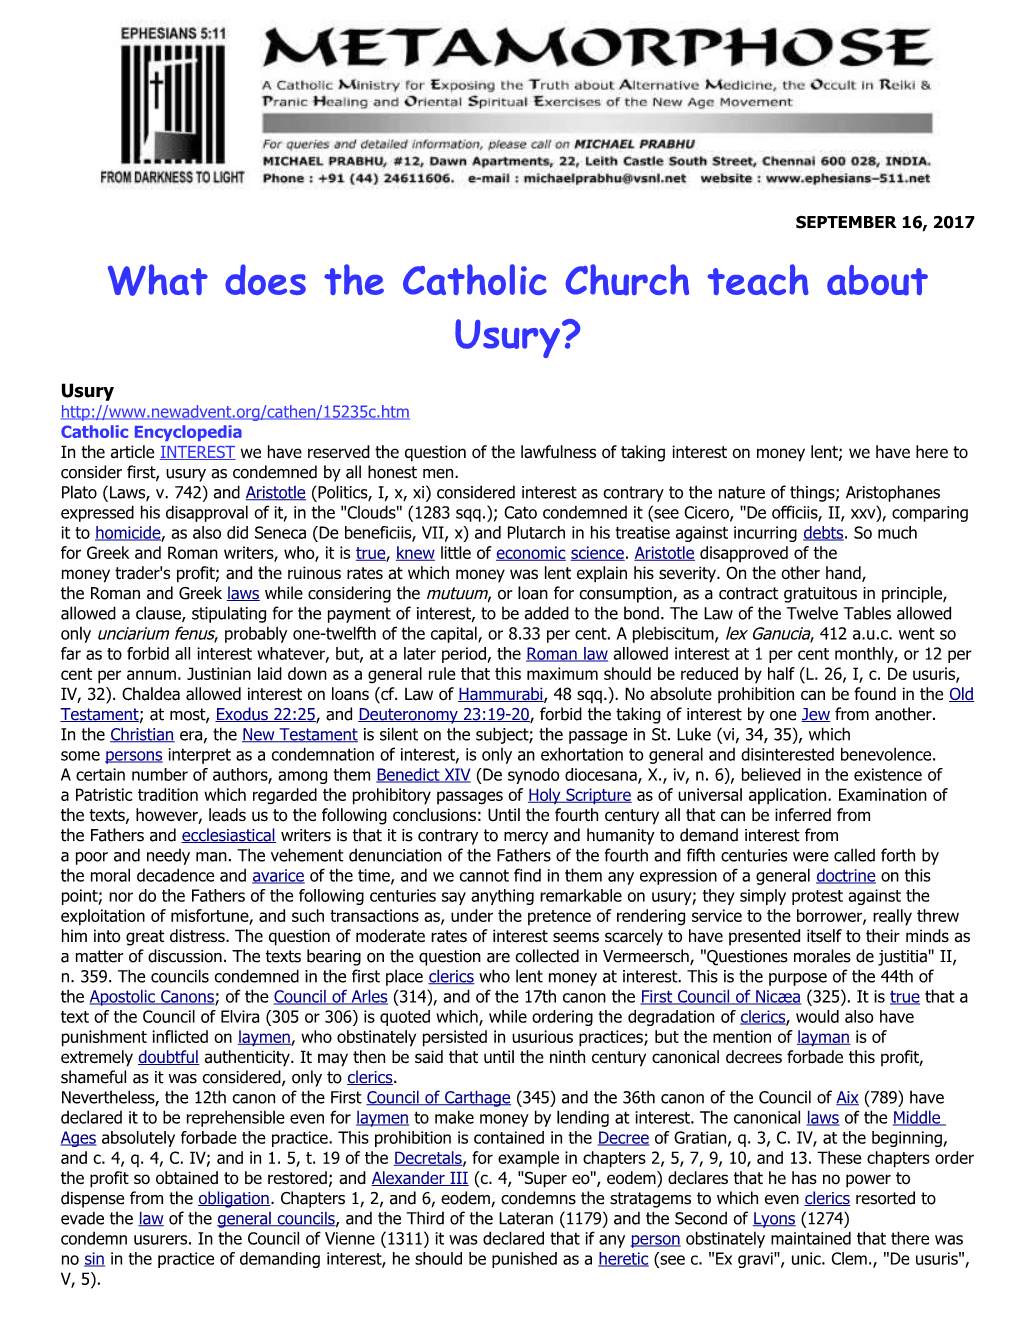 What Does the Catholic Church Teach About Usury?